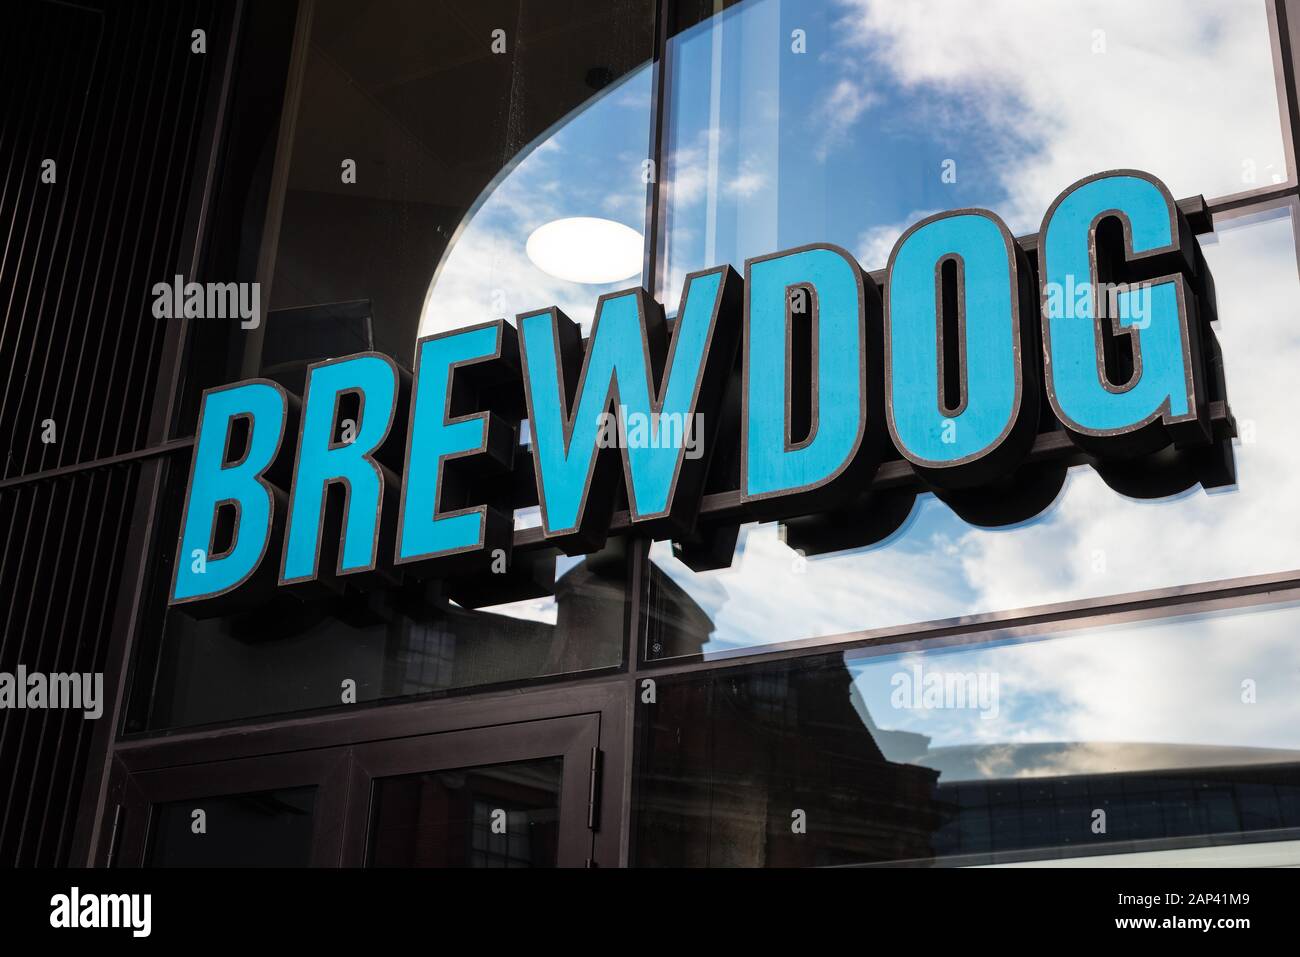 London, UK - Jan 16, 2020:  The sign for Brewdog on the front of one of their pubs in London Stock Photo